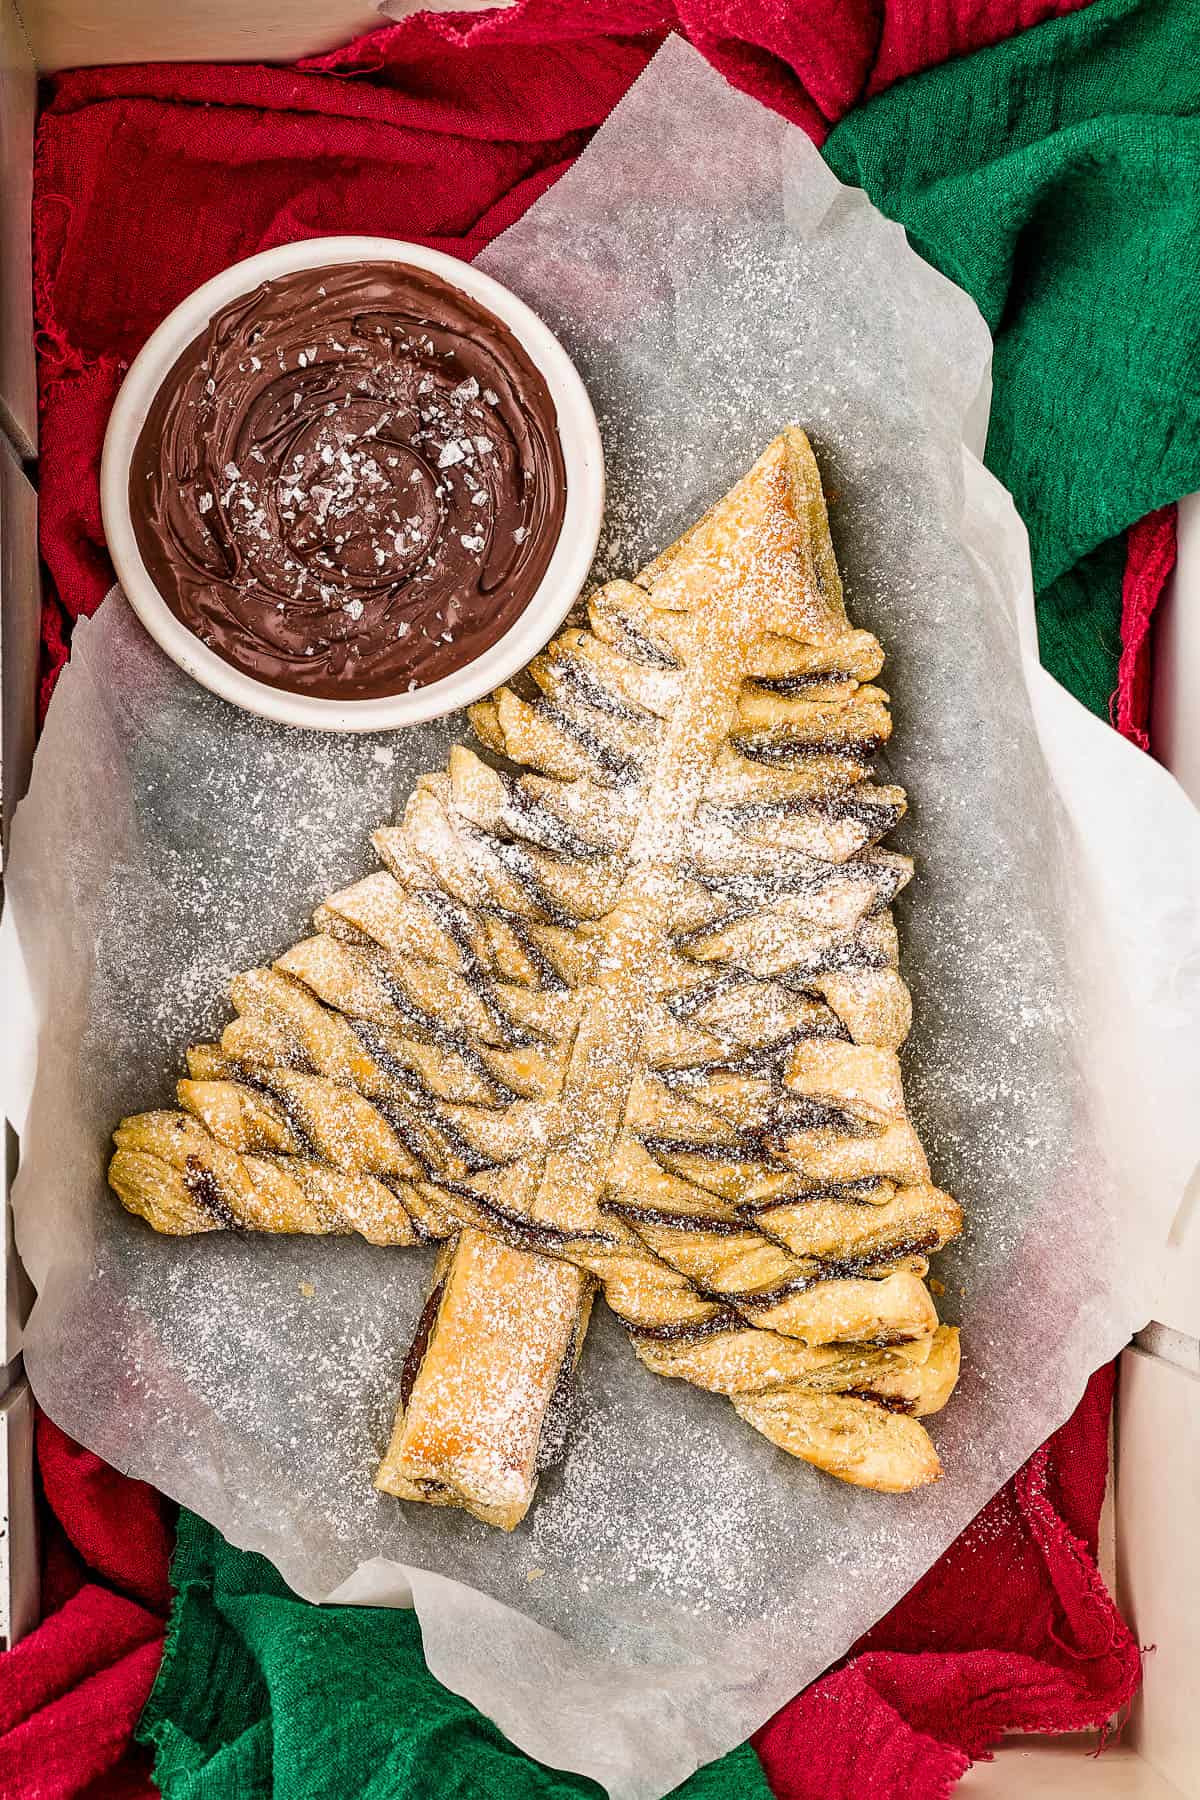 A baked Nutella tree on a piece of parchment, laid over green and red napkins. A bowl of salted Nutella dip sits nearby.